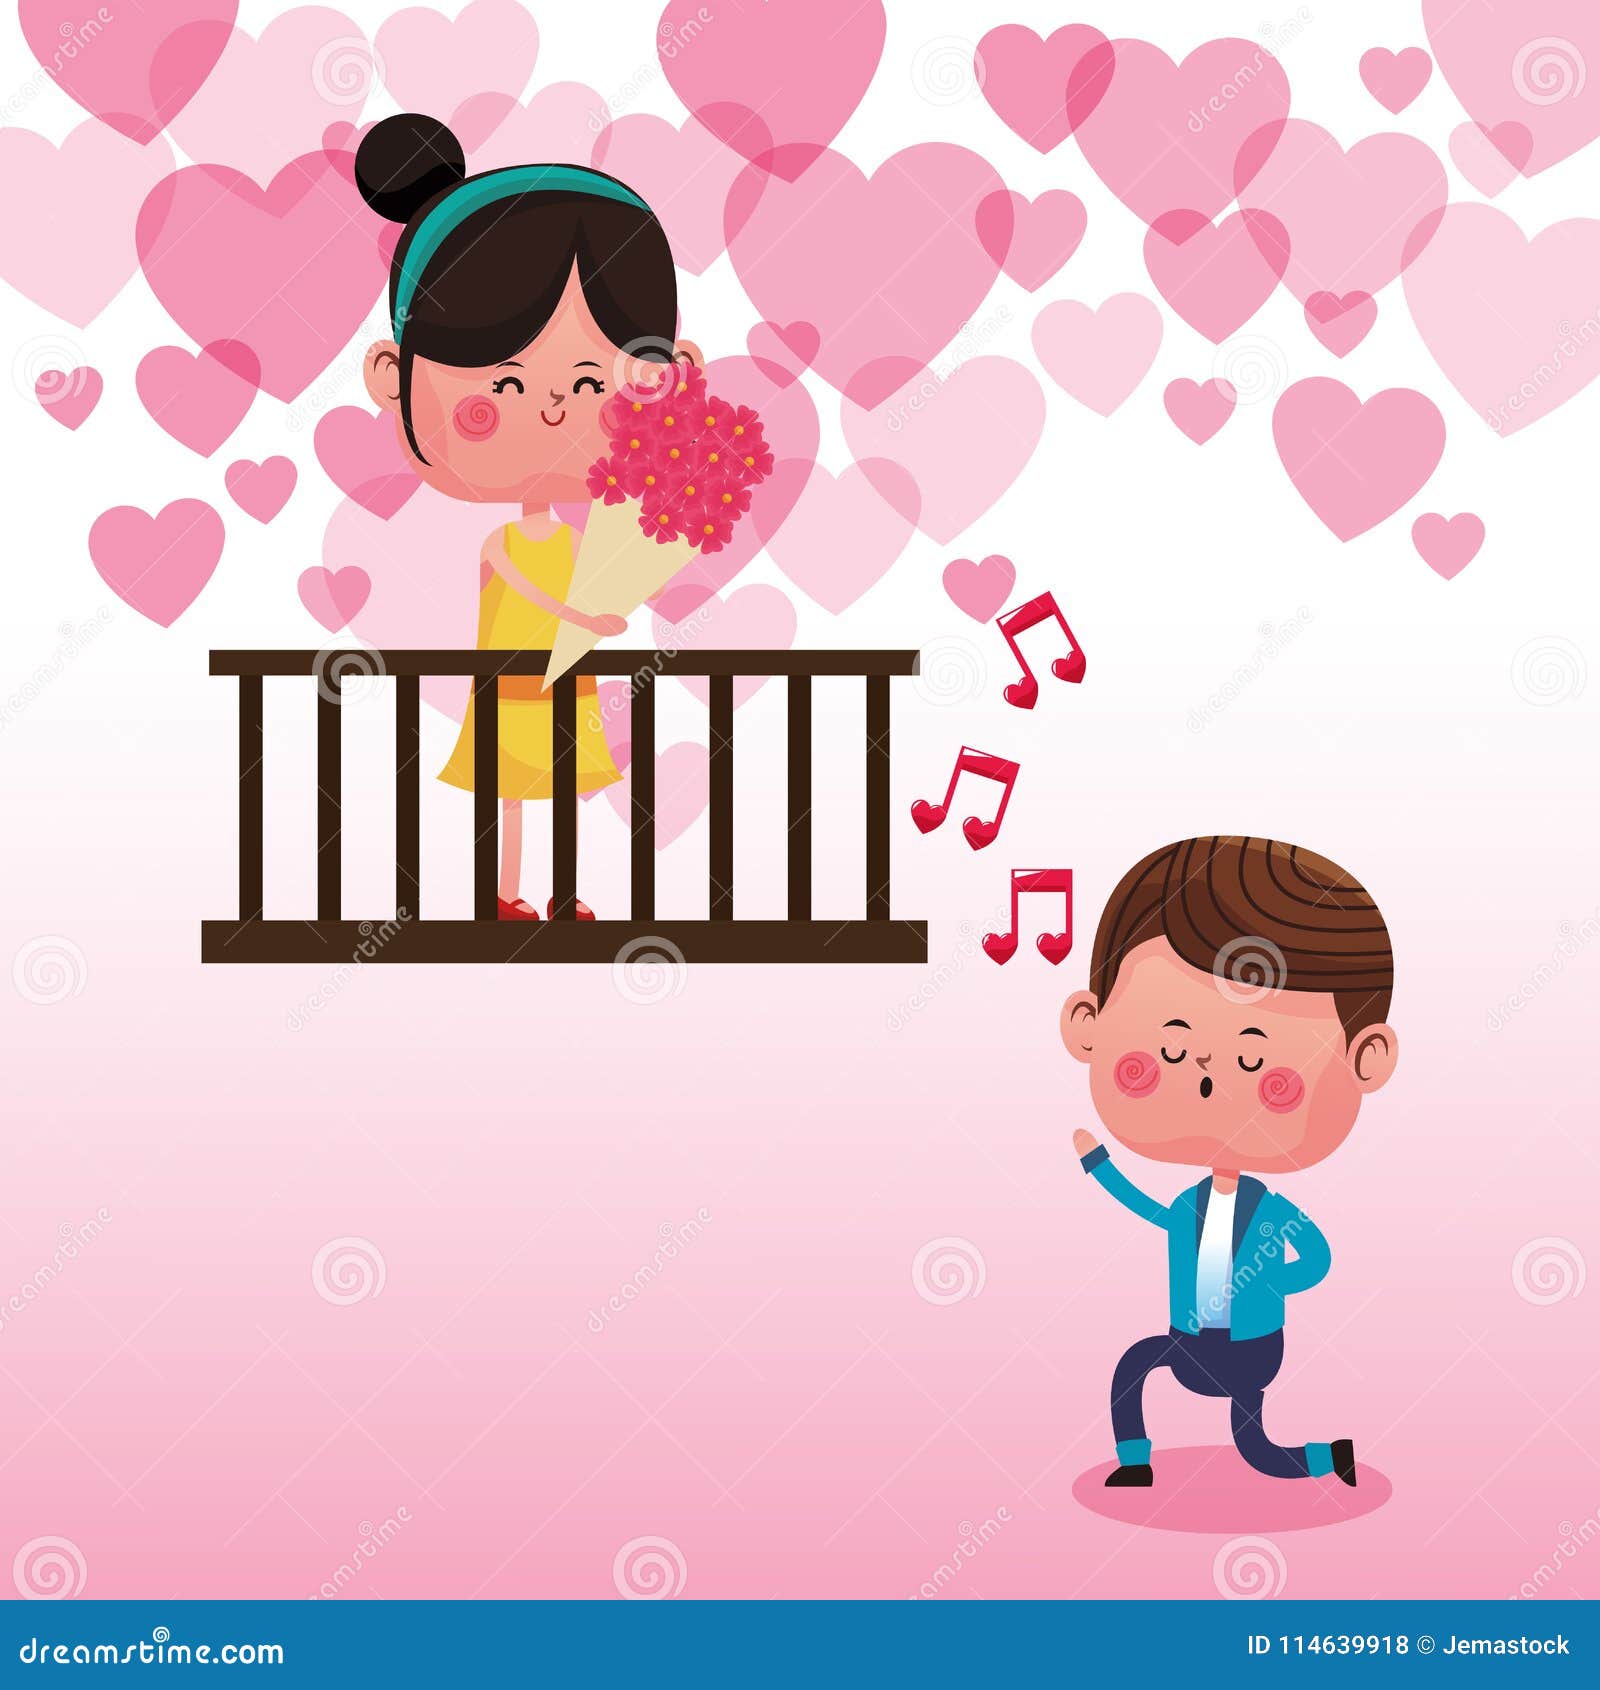 Cute Couple in Love Cartoons Stock Vector - Illustration of ...